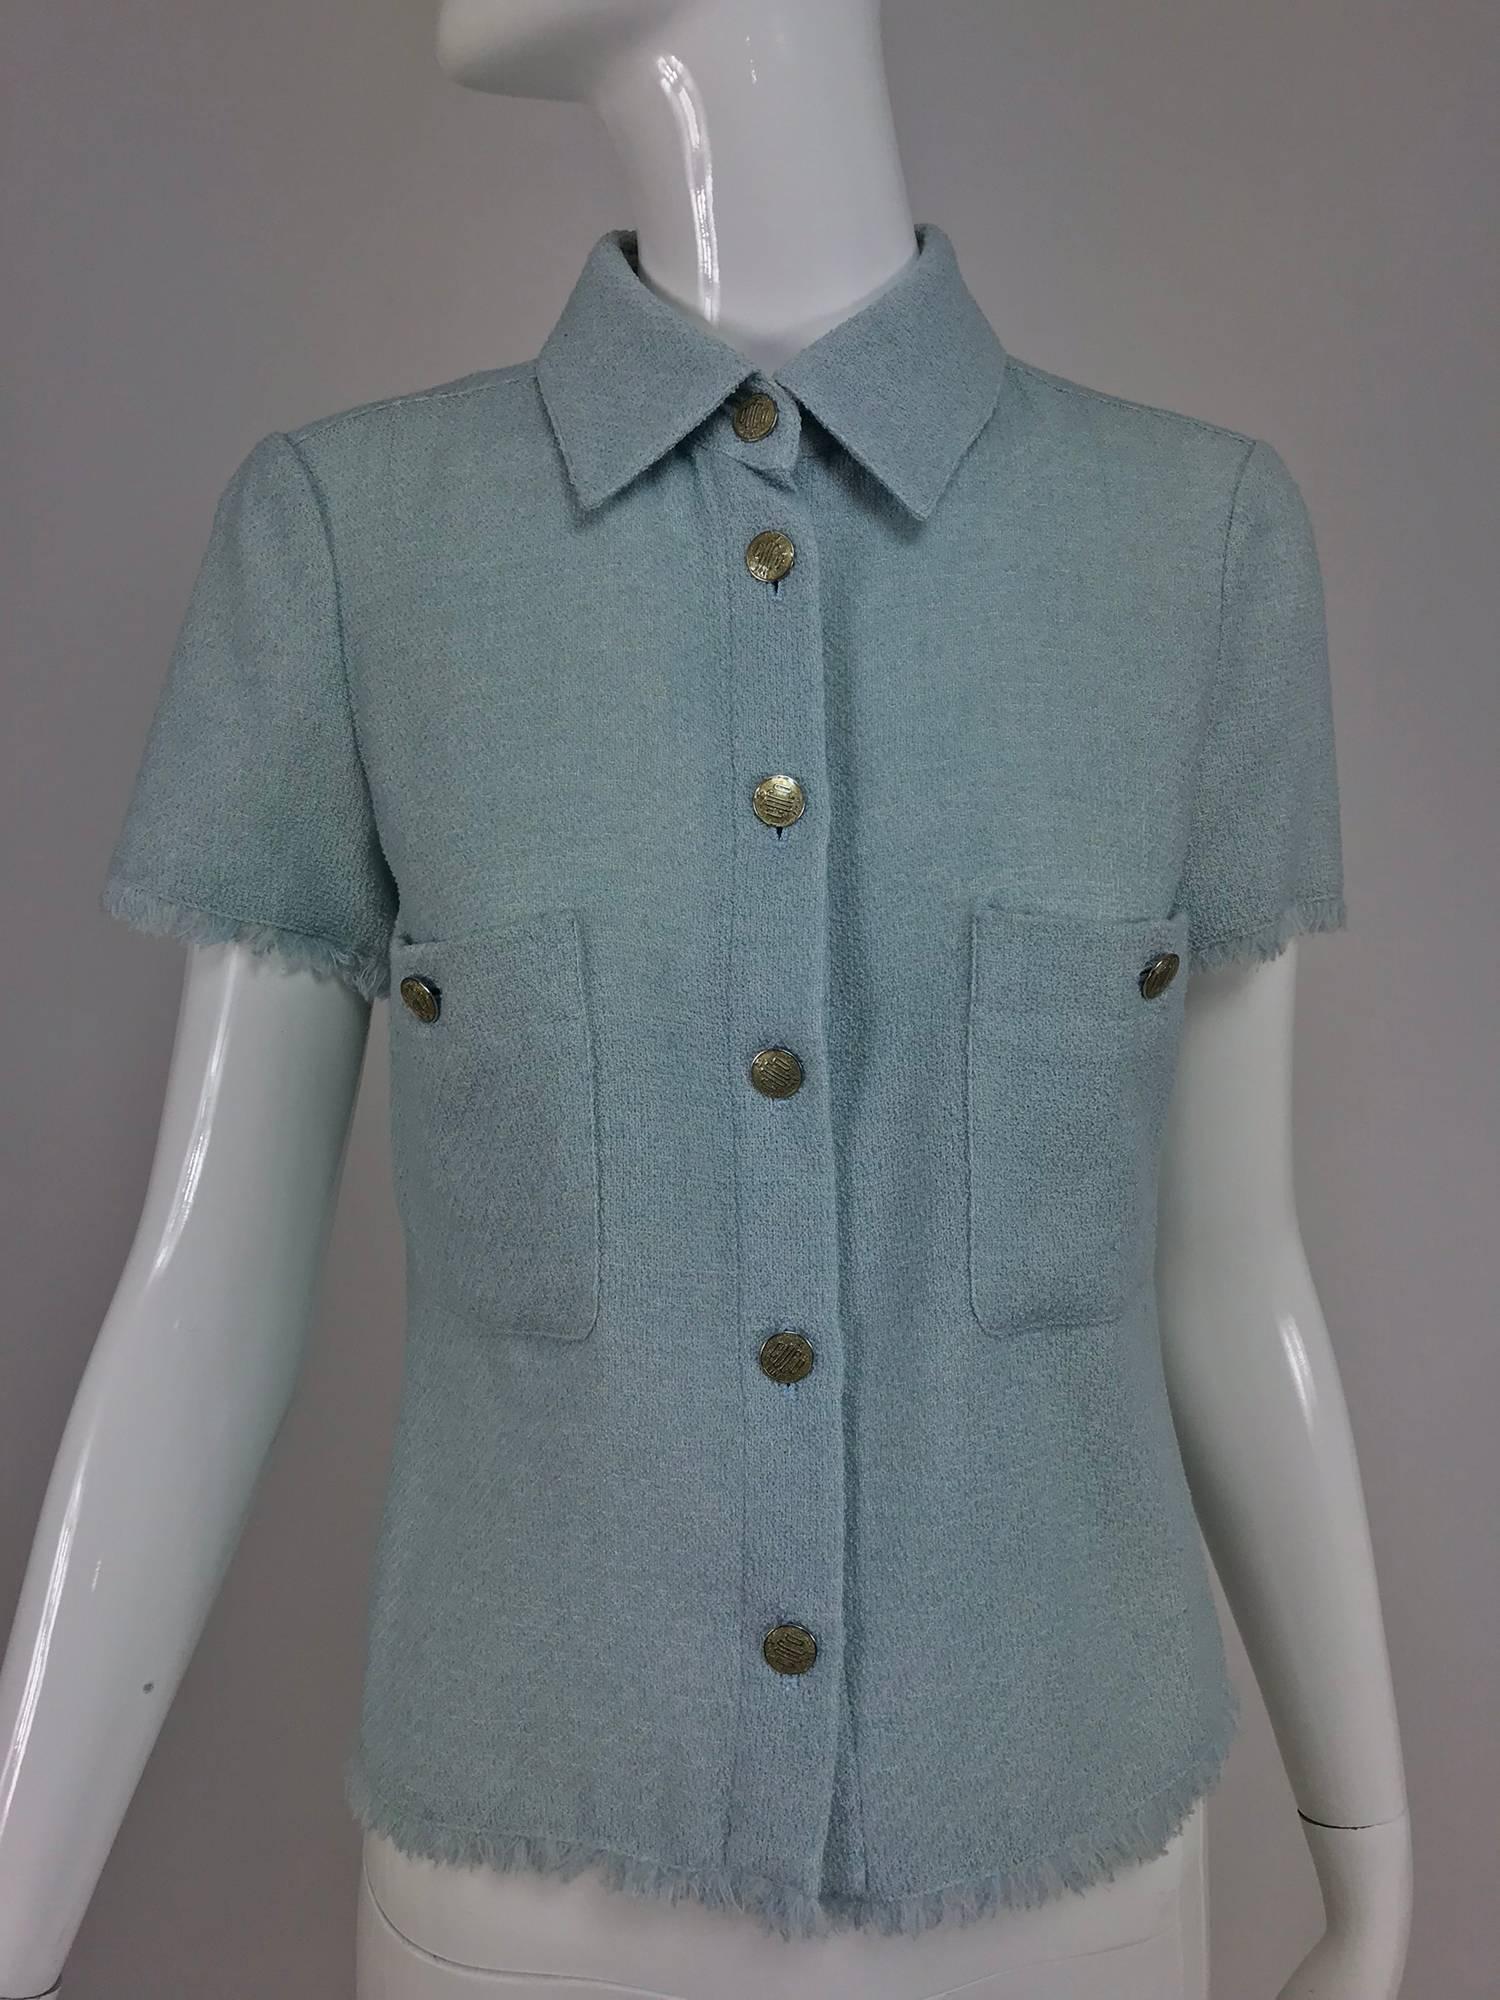 Chanel blue wool crepe short sleeve jacket 08C...Dusty blue wool crepe, short sleeved, unlined jacket...Fringe trimmed cuffs and hem...Button front with silver and gold enamel Coco buttons...Two breast button through patch pockets...Marked size 36,